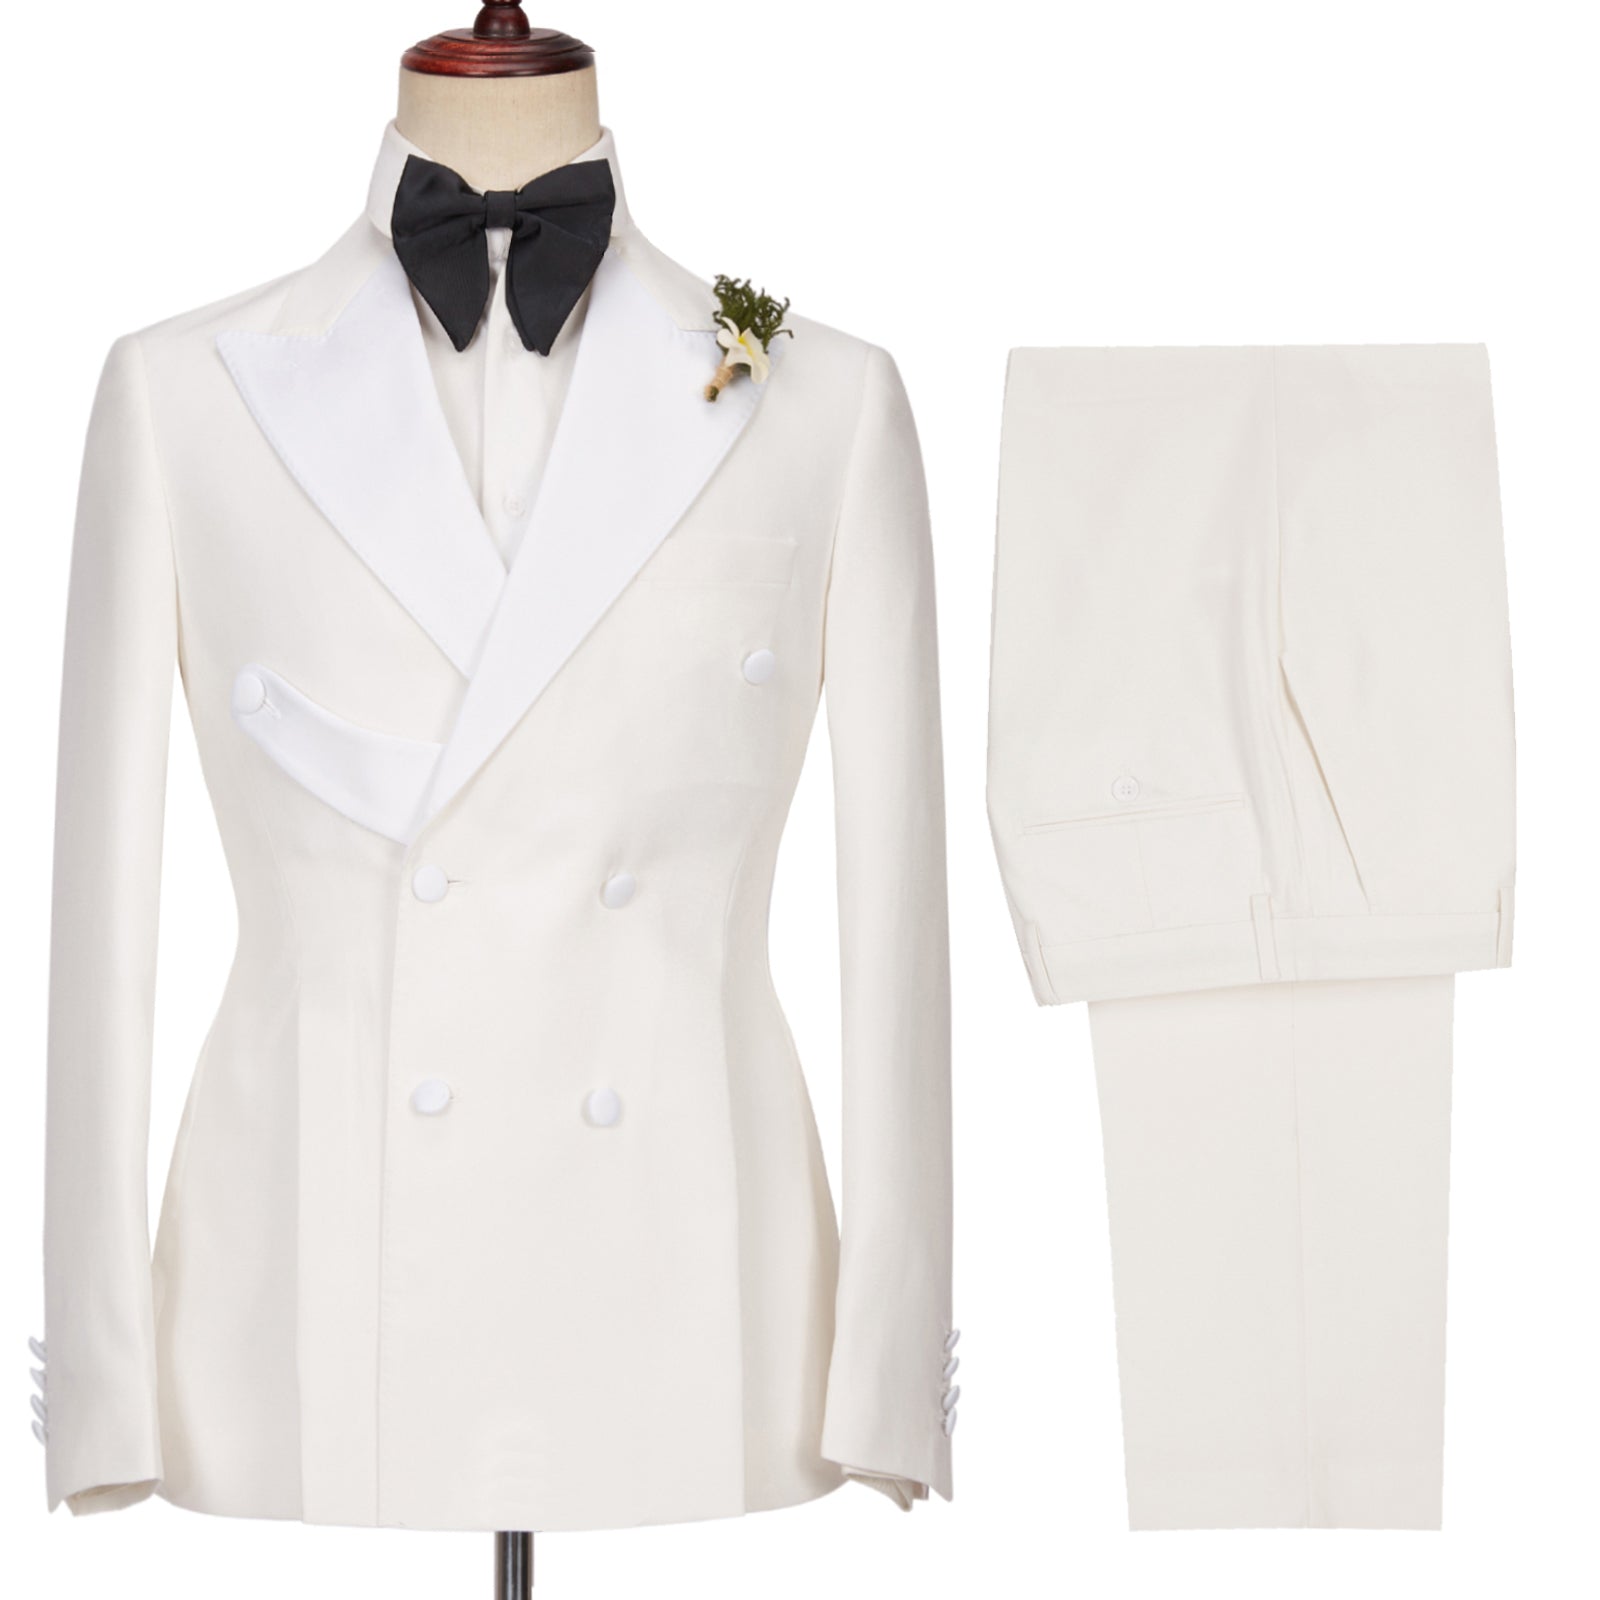 Alejandro Chic White Two-Piece Wedding Suits with Peaked Lapel Double Breasted-Wedding Suits-BallBride